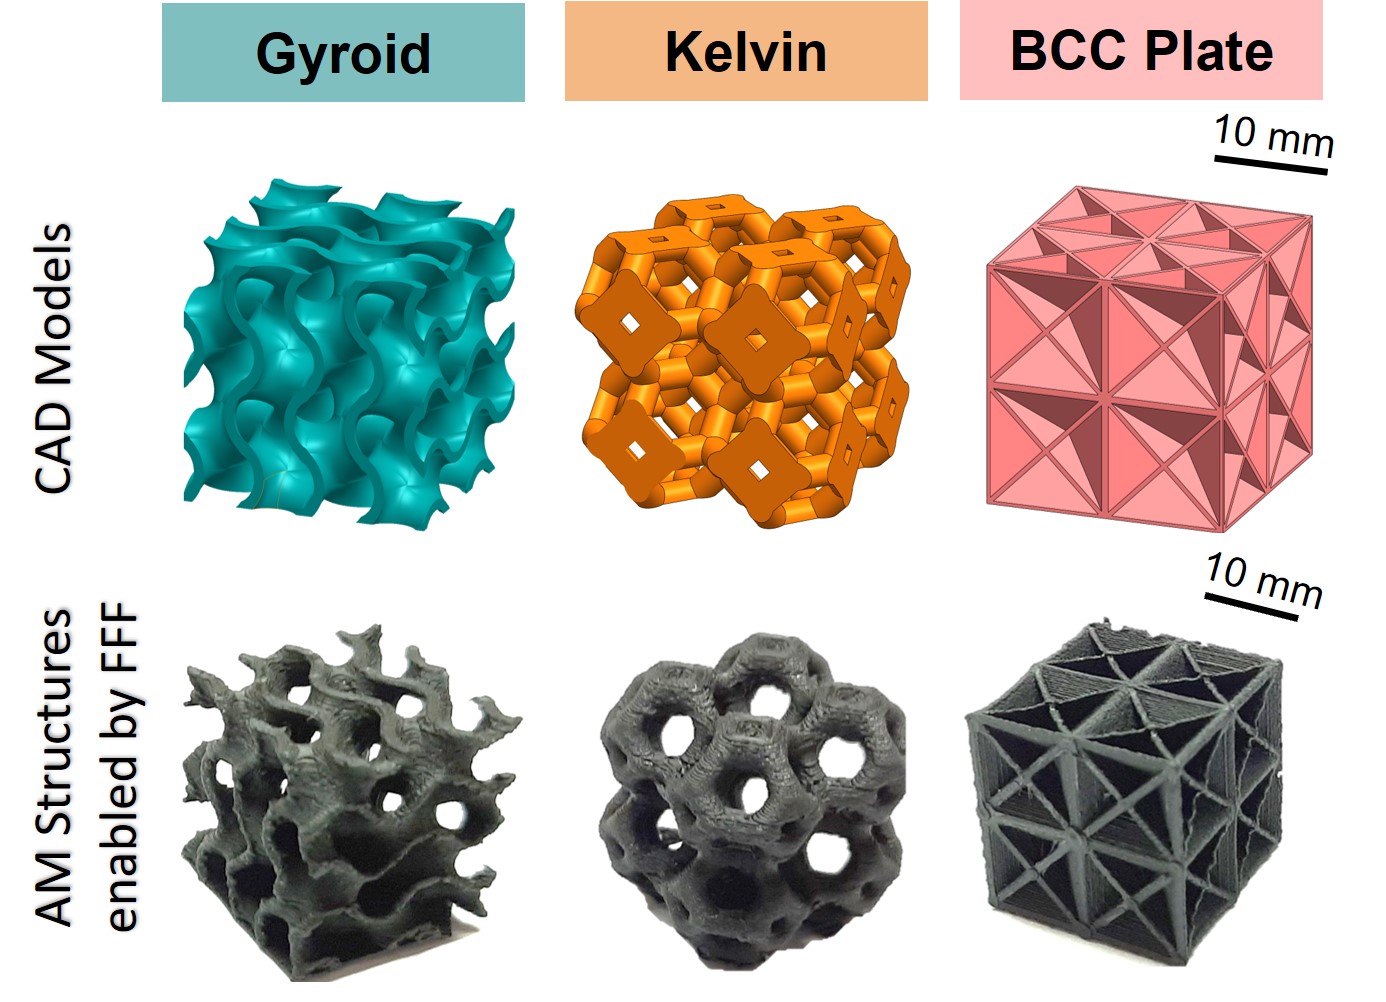 A diagram showing the gyroid, kelvin and BCC plate architected-structure designs developed by Dr Shanmugam Kumar and colleagues